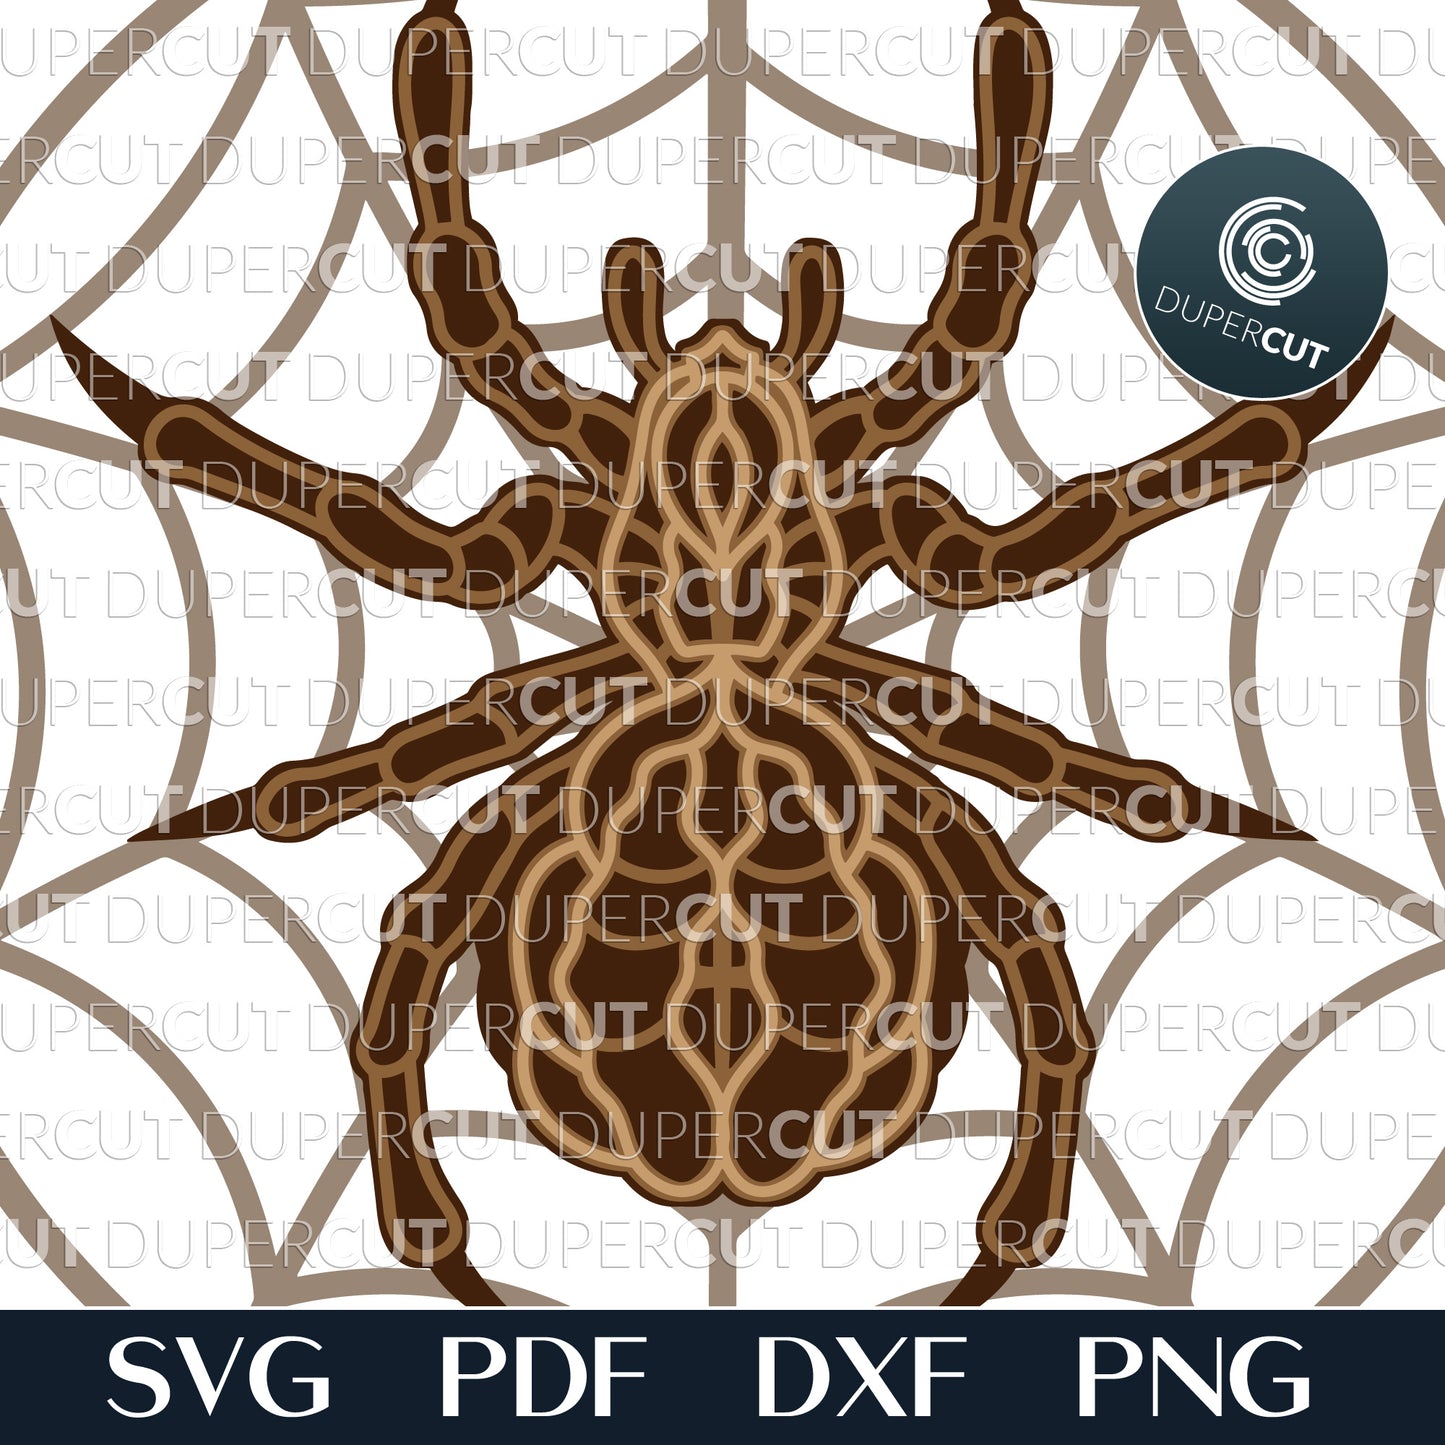 Web with a spider - layered cut files - SVG PDF DXF vector template for Glowforge, Cricut, Silhouette Cameo, laser cutting machines